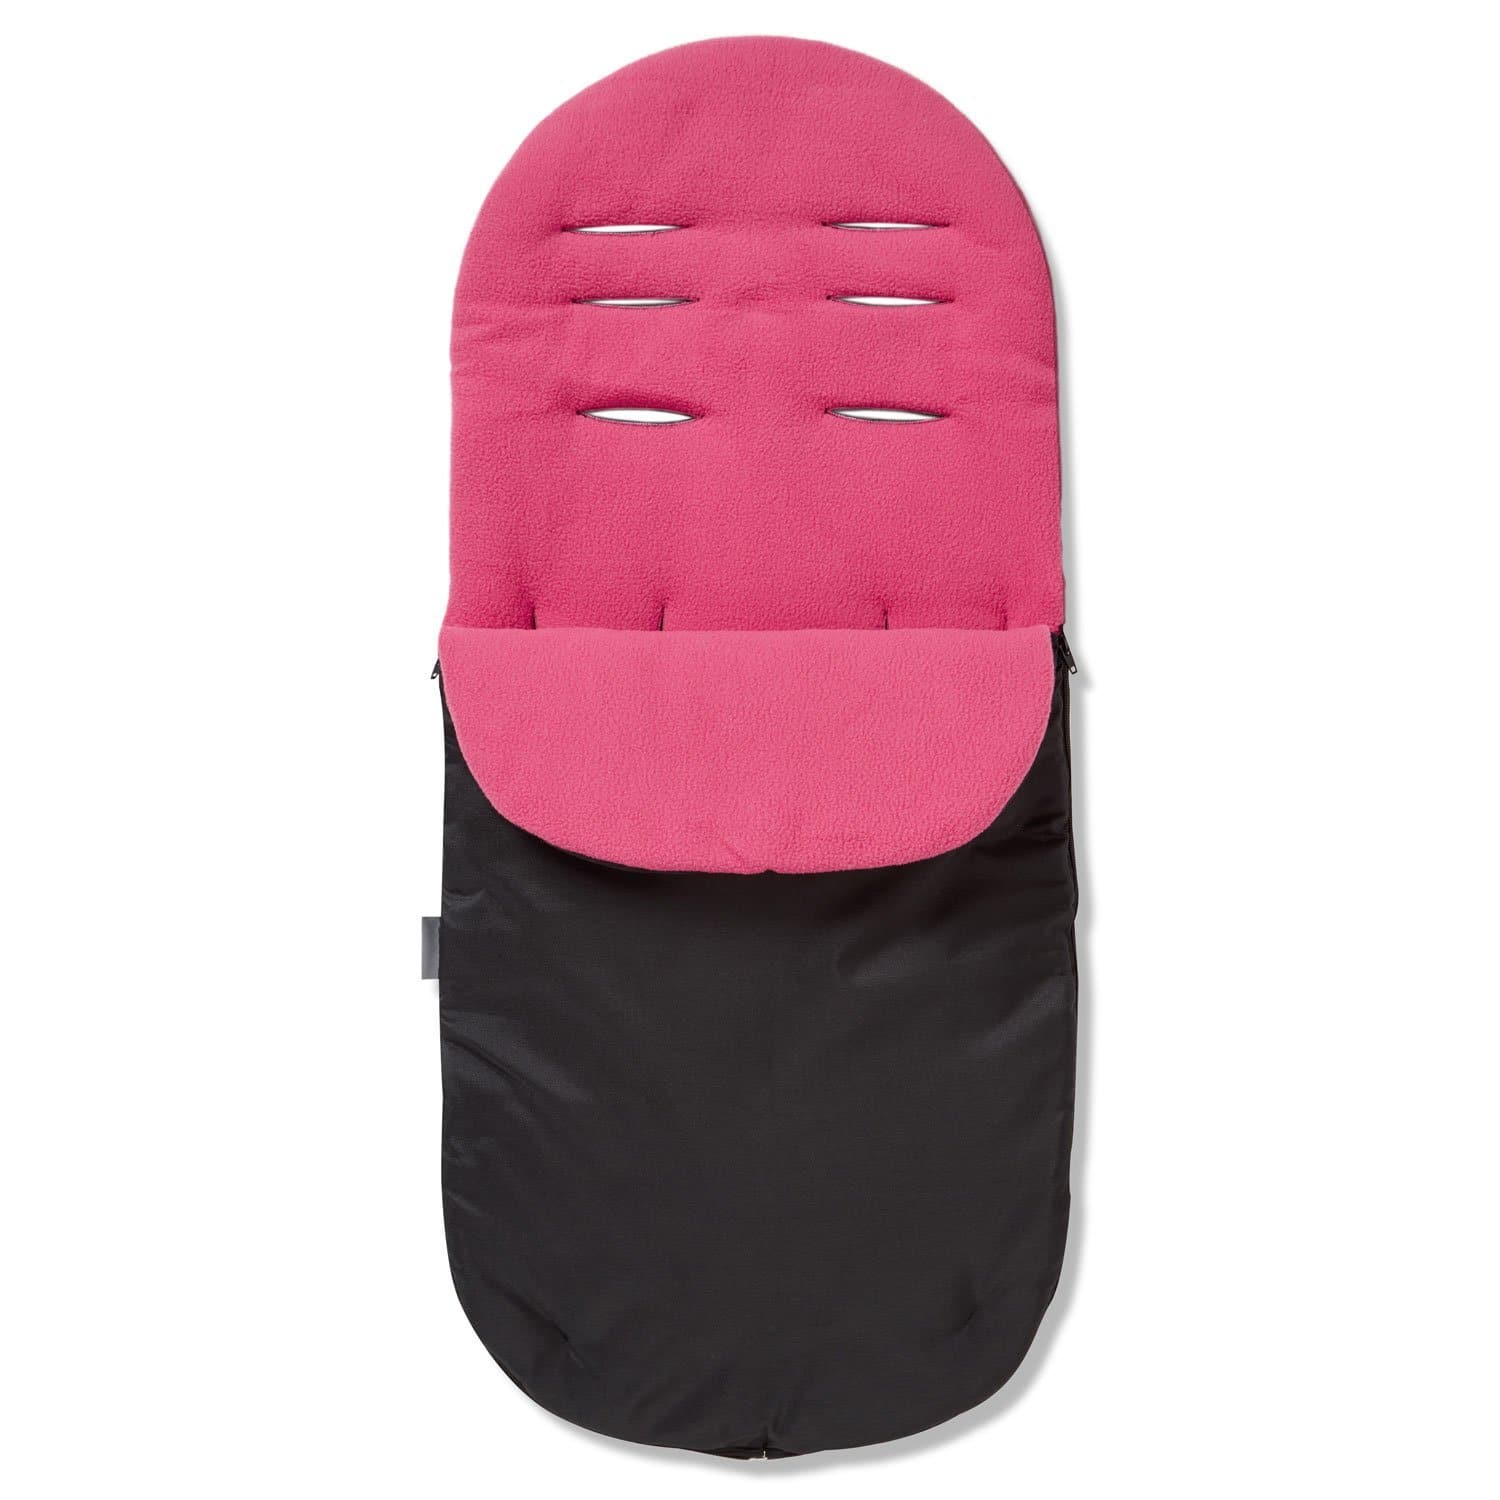 Footmuff / Cosy Toes Compatible with NeoNato - Dark Pink / Fits All Models | For Your Little One